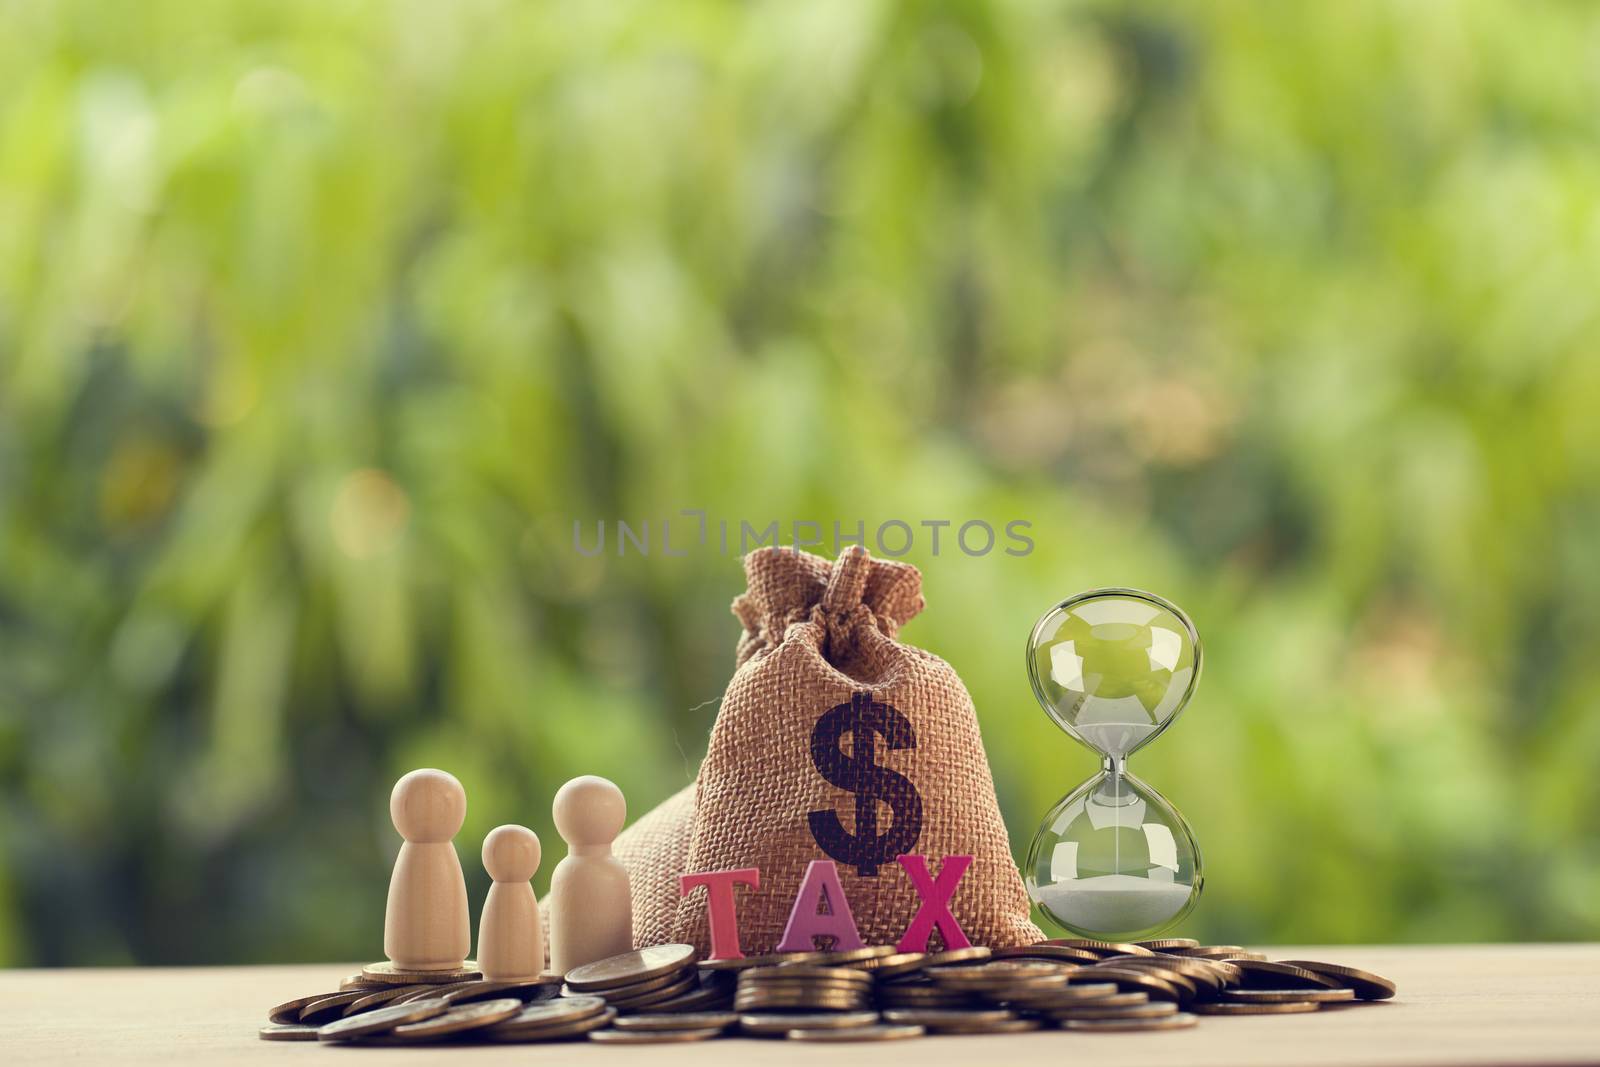 Family members, words tax, hourglass, US money bags on a pile of coins. Family tax benefit, property tax concept: depicts time and income management for future security by setila